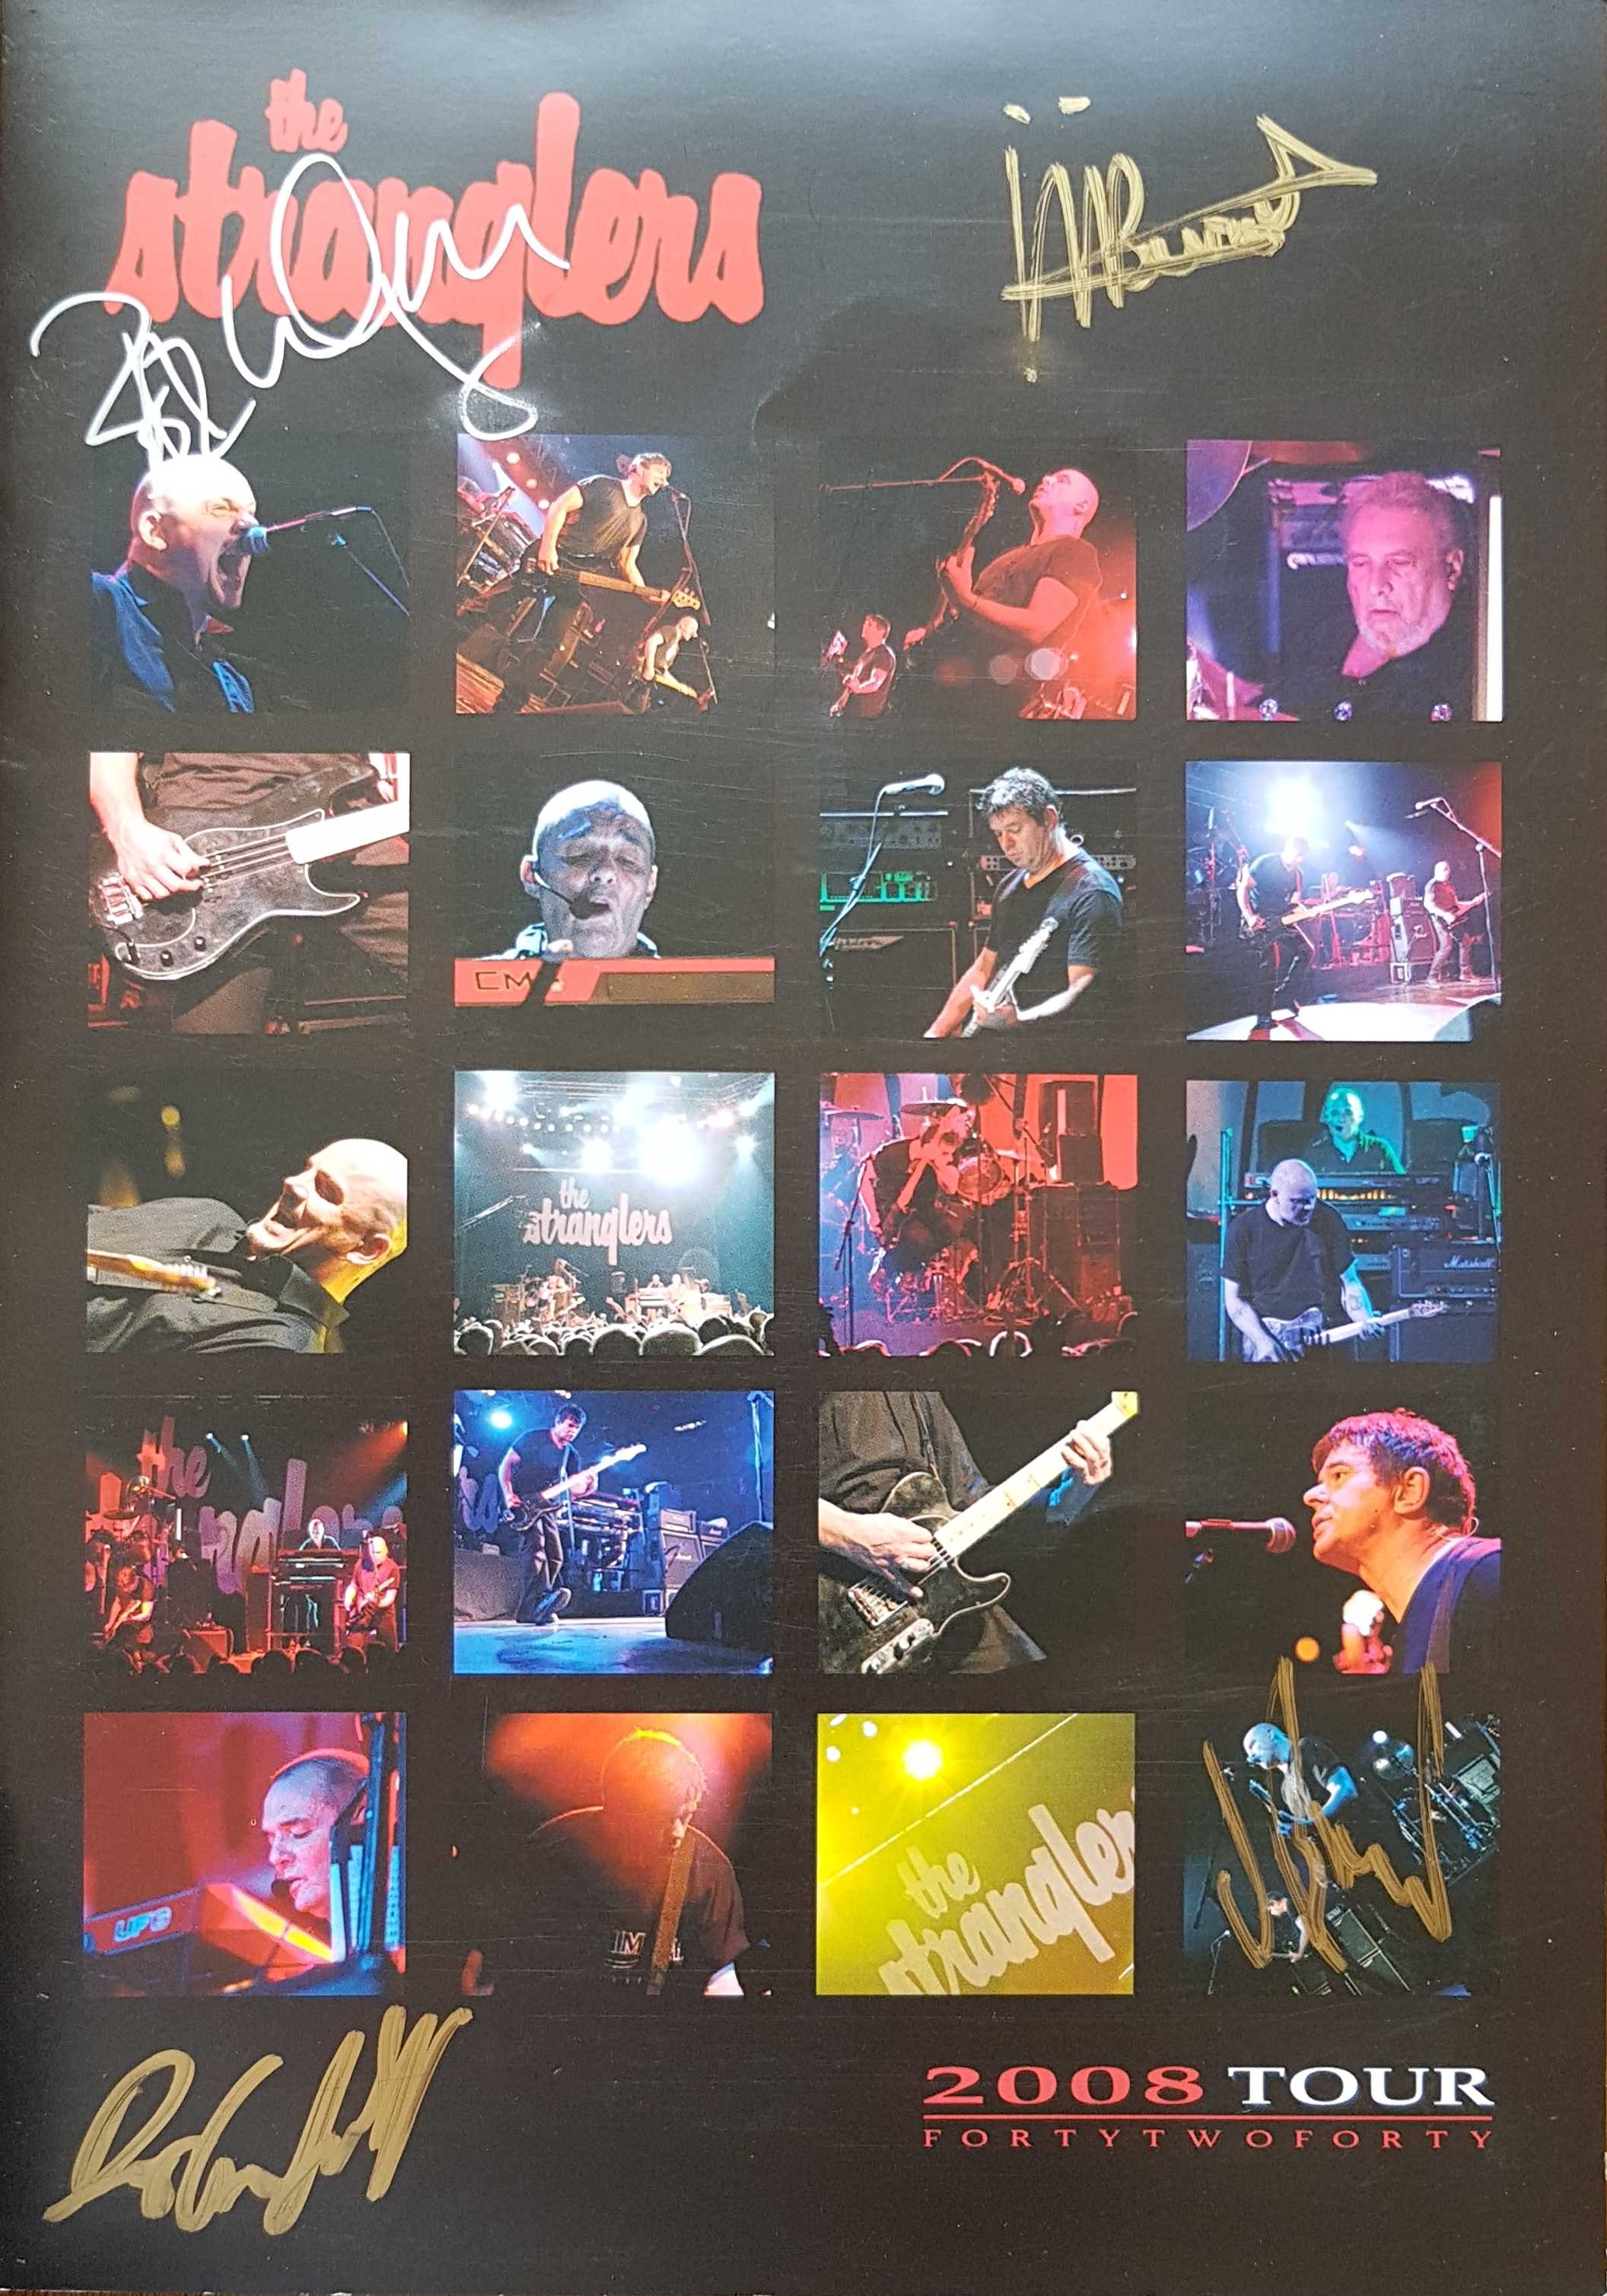 Picture of 2008 tour by artist The Stranglers  from The Stranglers books